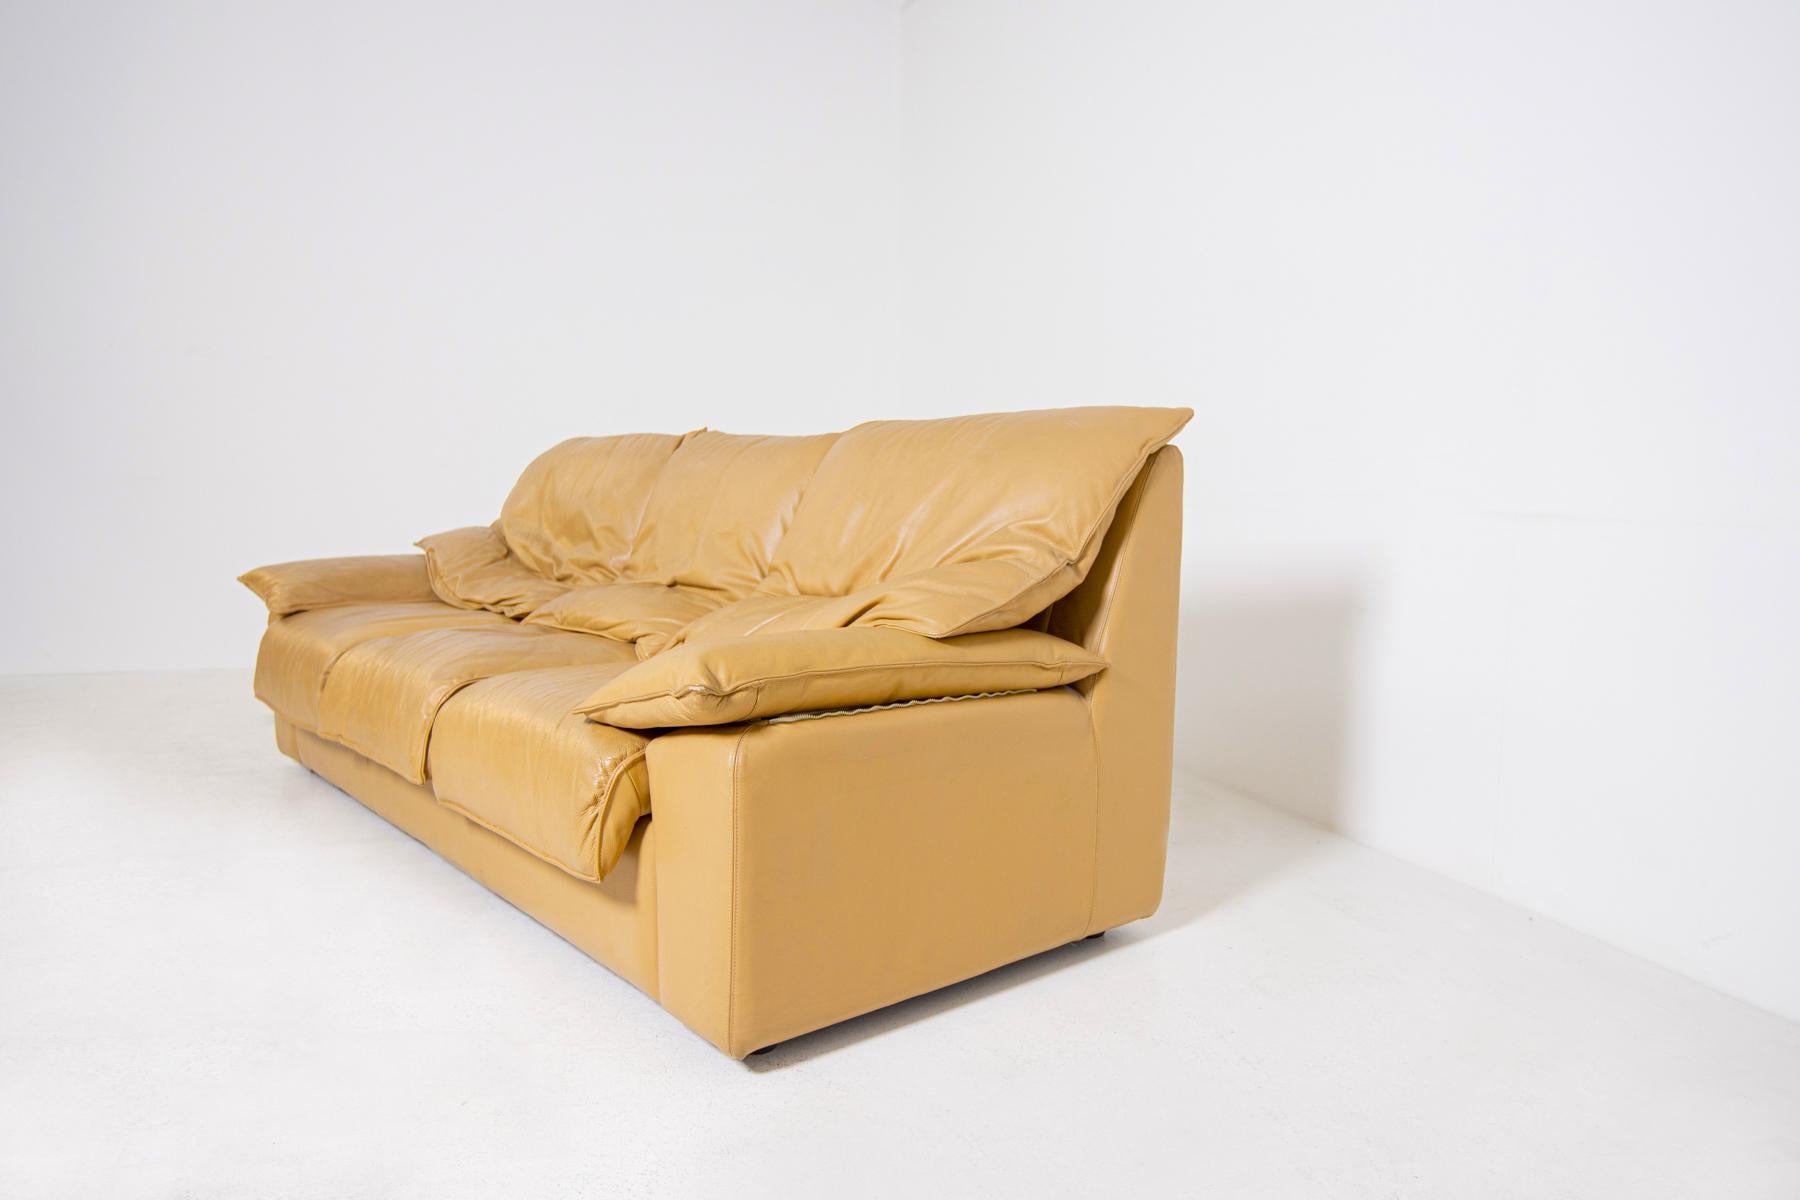 Vintage Italian Sofa Camel-Colored Leather Three-Seat, 1970s In Good Condition For Sale In Milano, IT